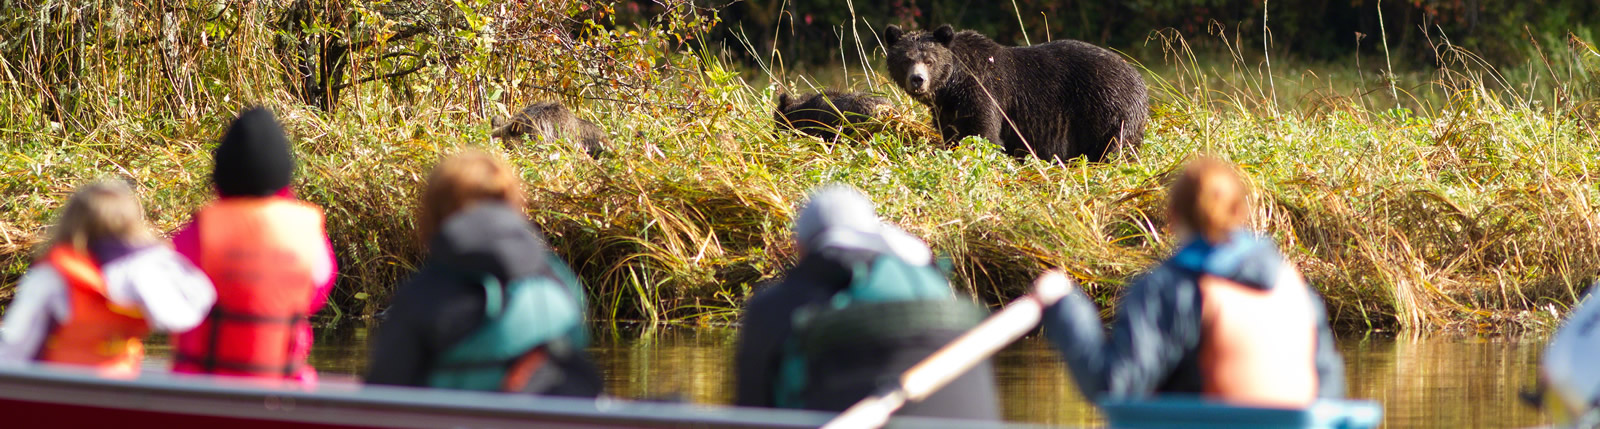 Grizzly Bear Viewing Session © Great Bear Lodge